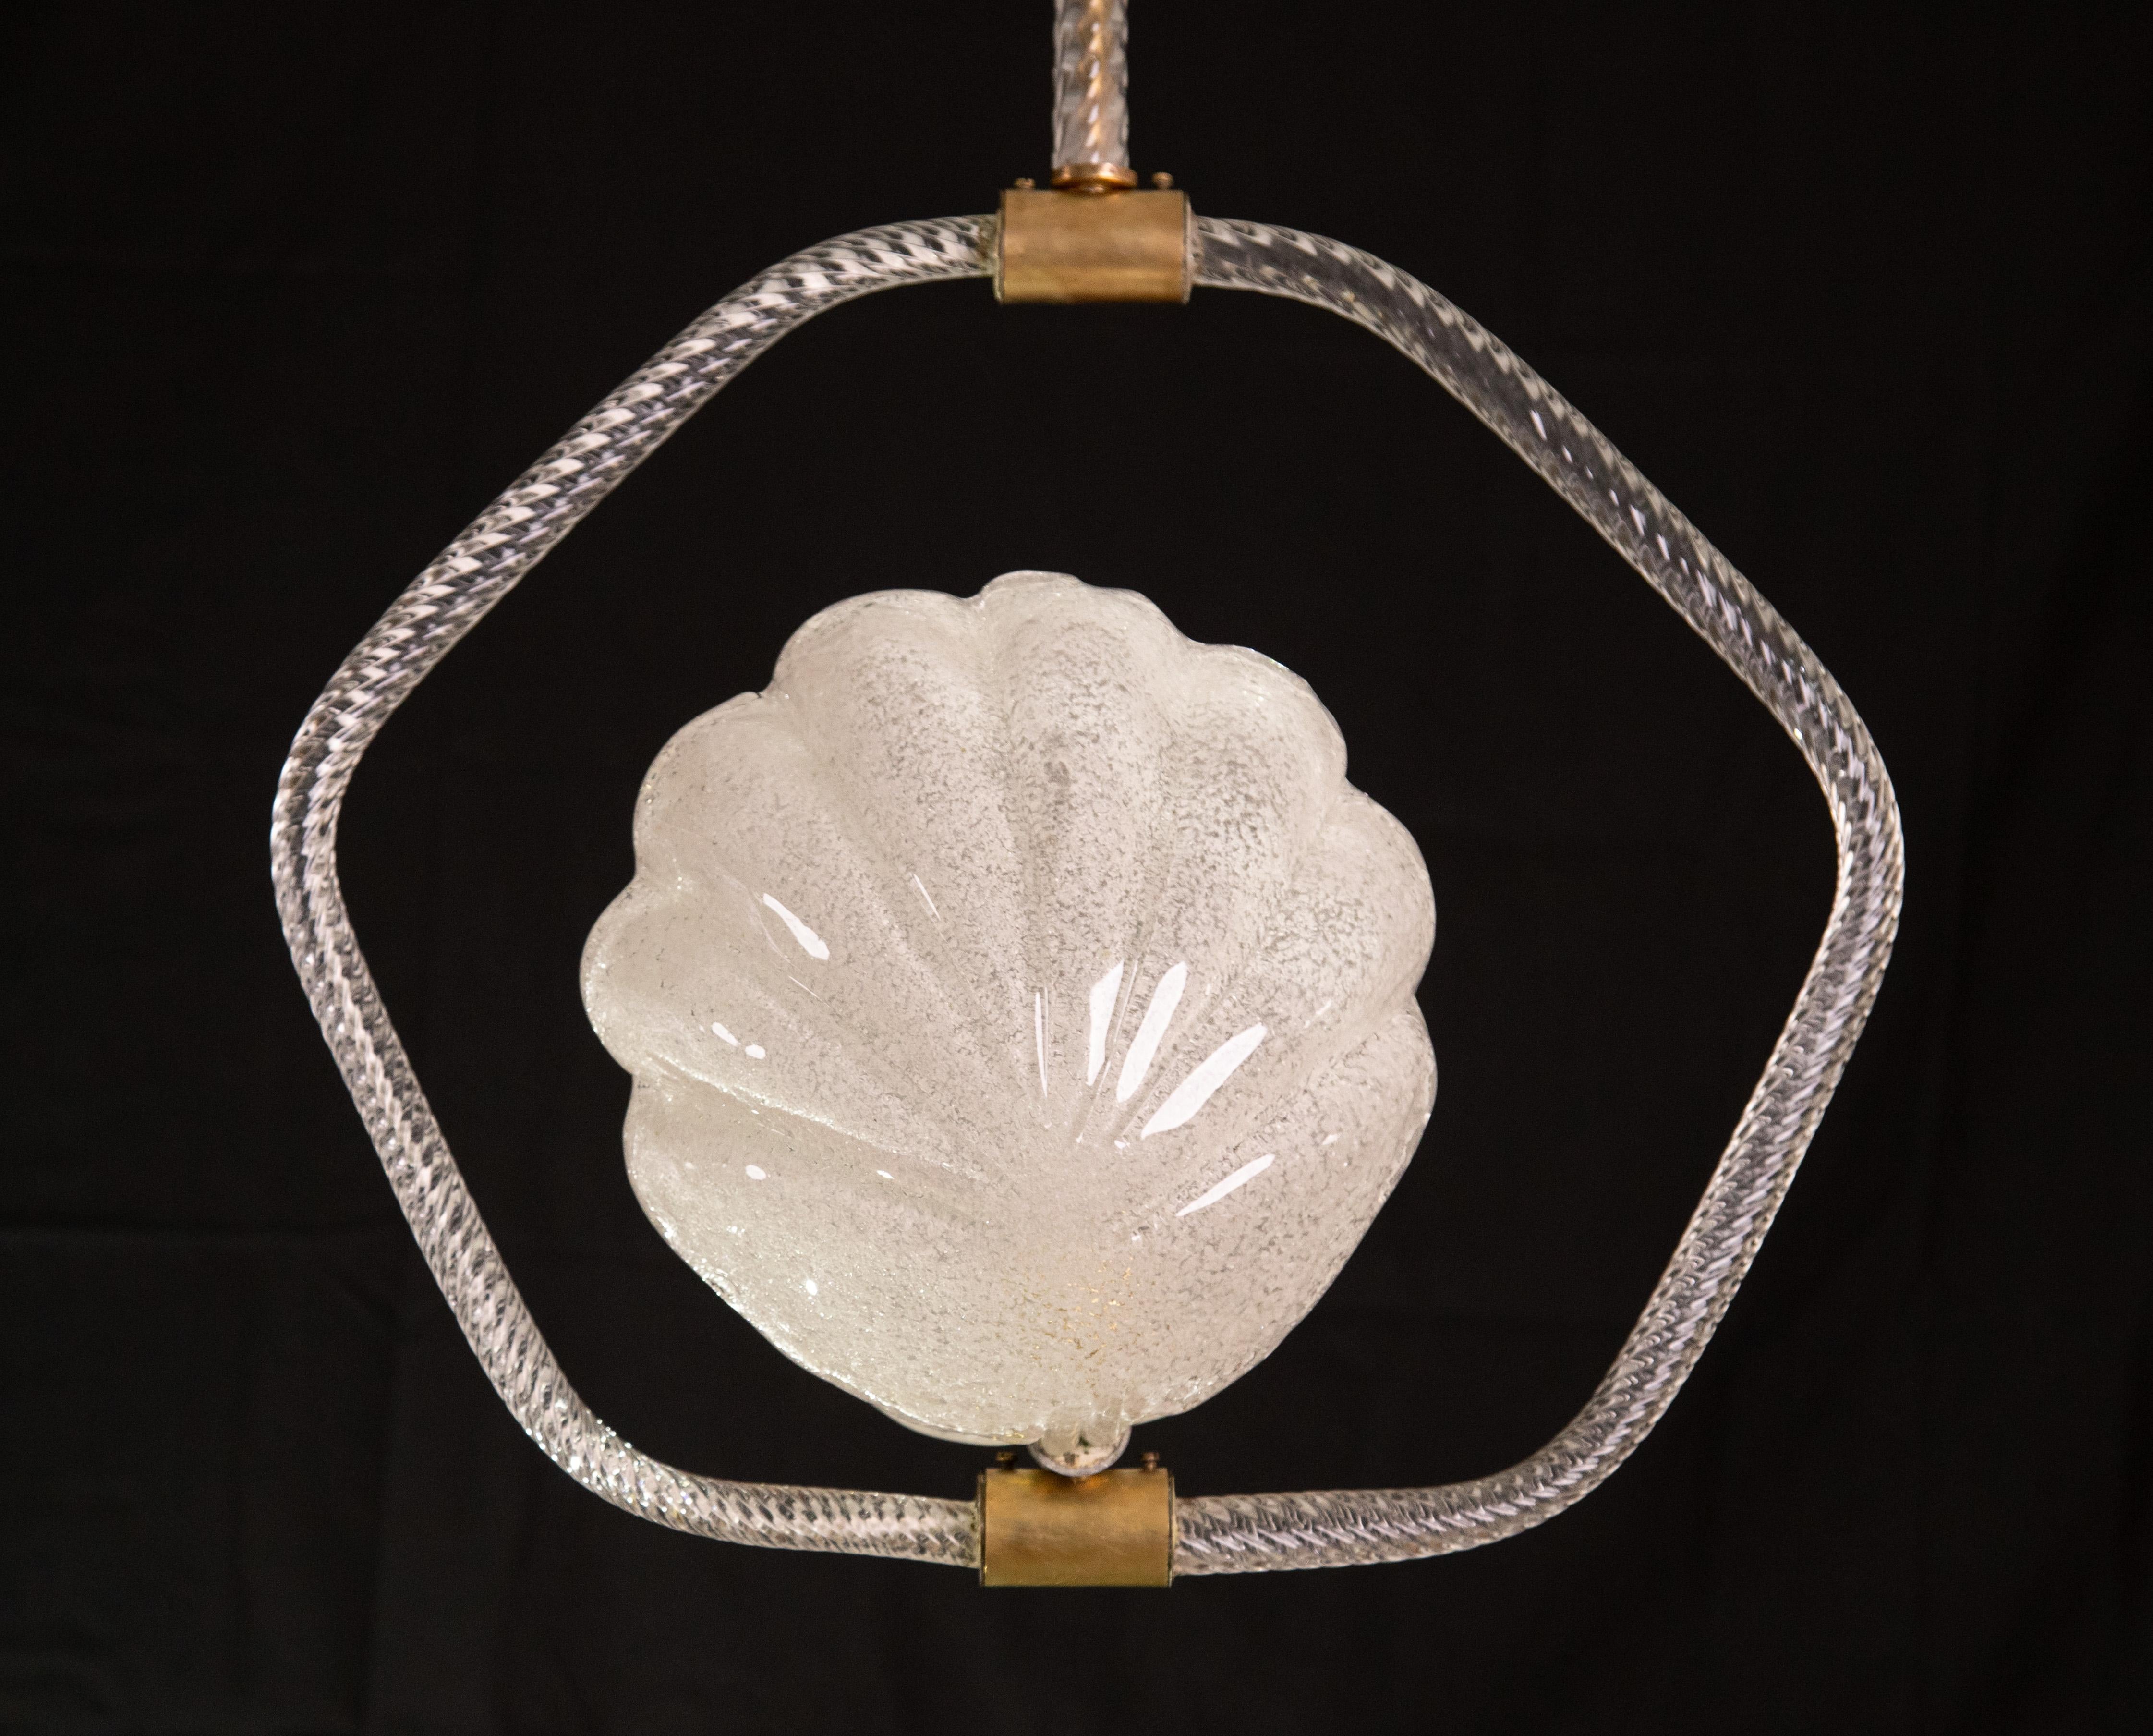 Shell Trasparent Murano Glass Chandelier by Barovier e Toso, 1940s For Sale 3